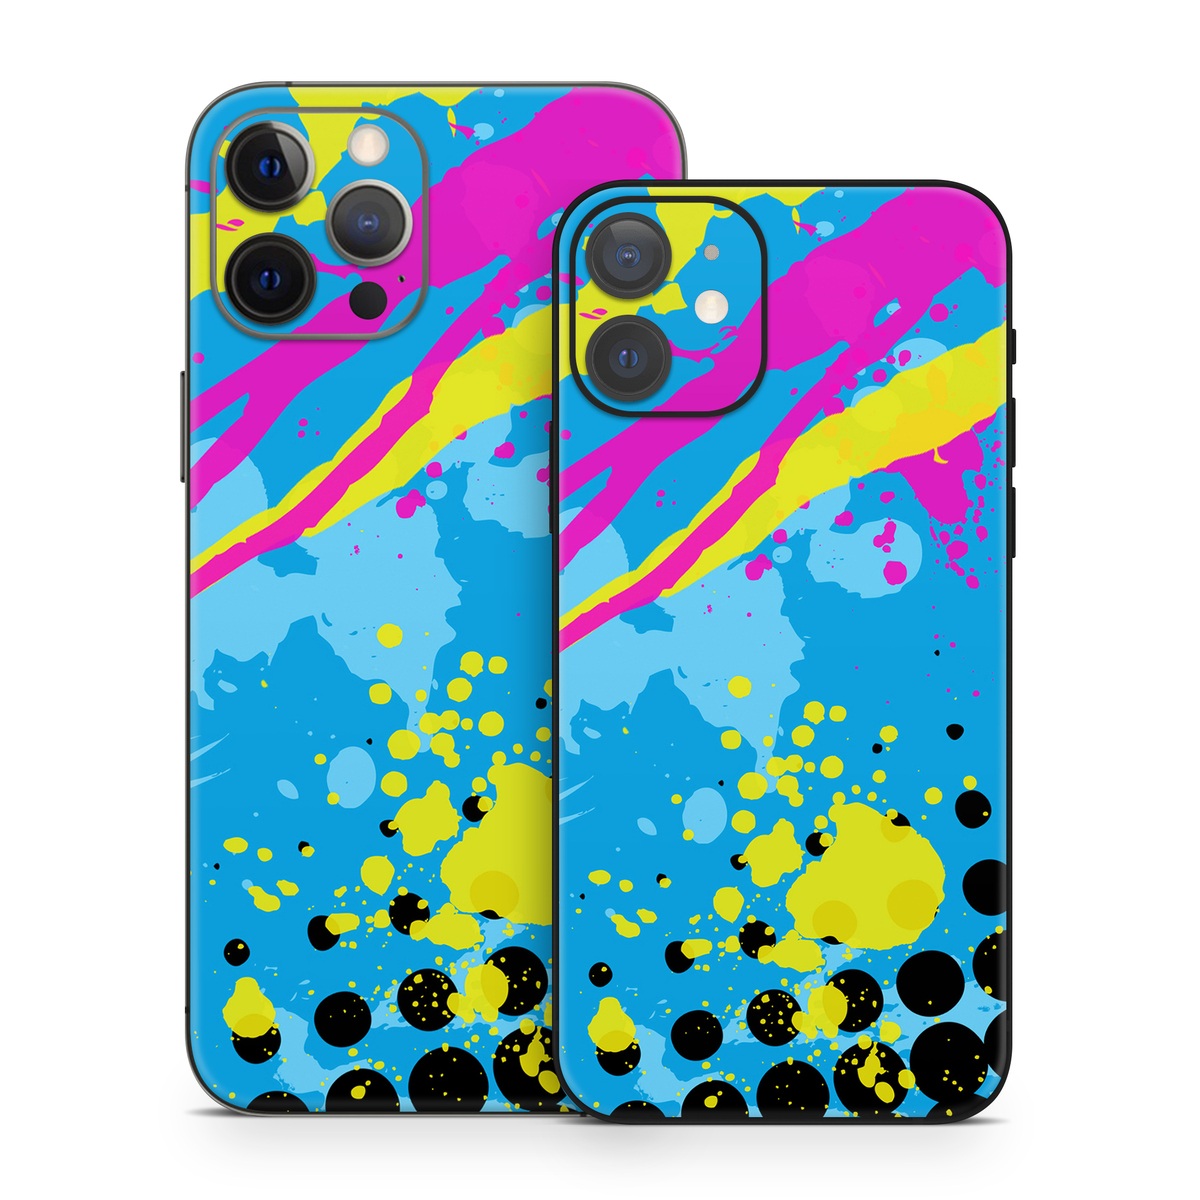 iPhone 12 Series Skin design of Blue, Colorfulness, Graphic design, Pattern, Water, Line, Design, Graphics, Illustration, Visual arts, with blue, black, yellow, pink colors